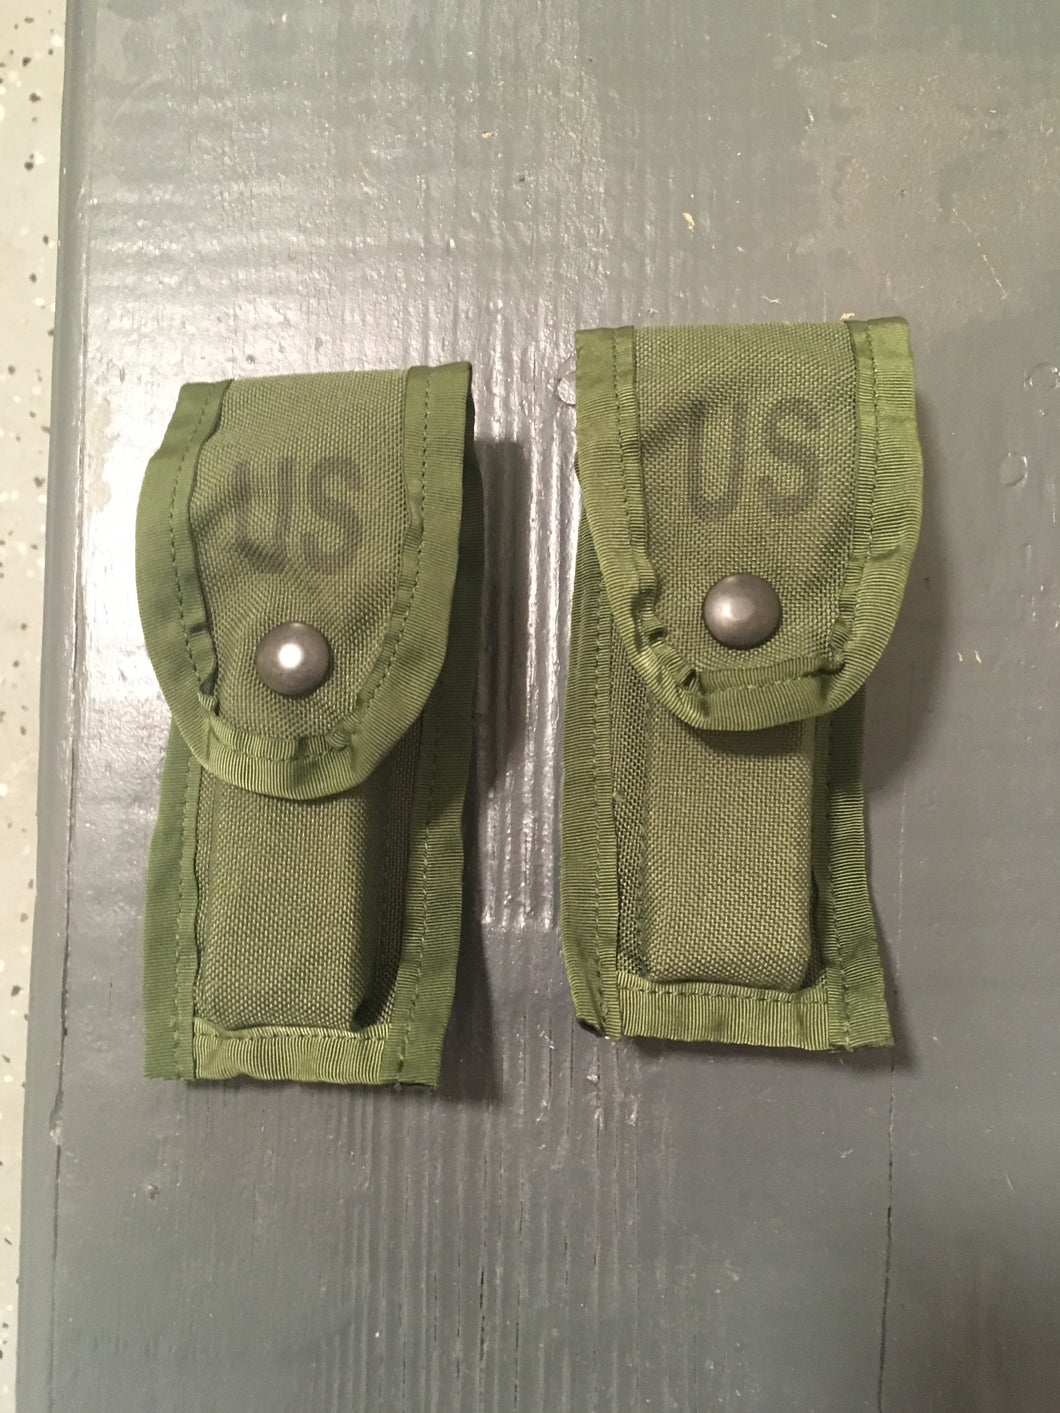 2-US Military 9MM Single Mag Magazine Pouch With Alice Clips/ OD/ New Old Stock MAGAZINES NOT INCLUDED